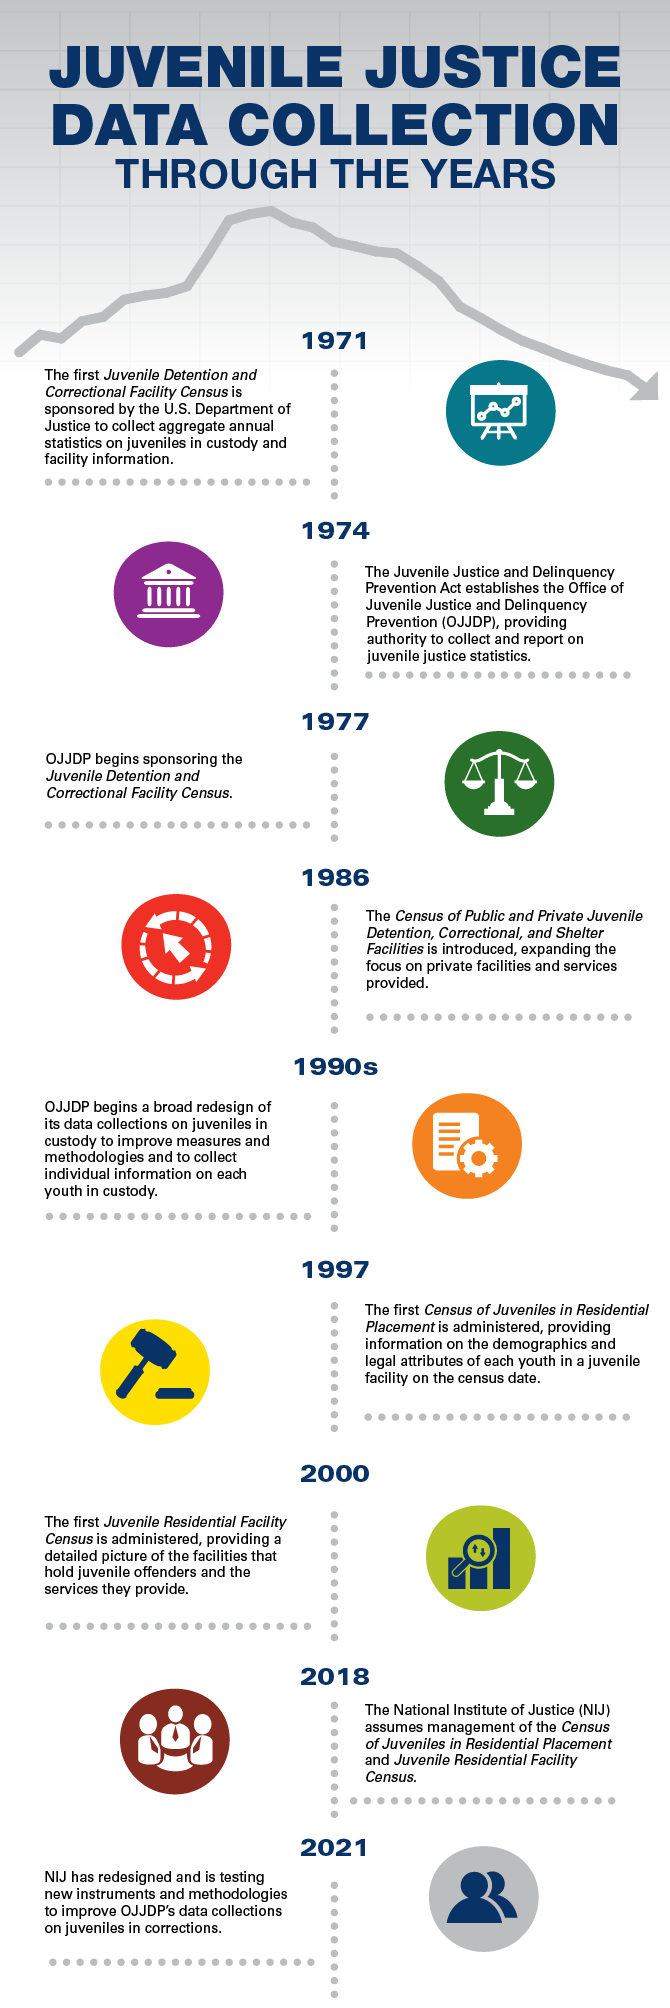 Juvenile Justice Data Collection Through the Years